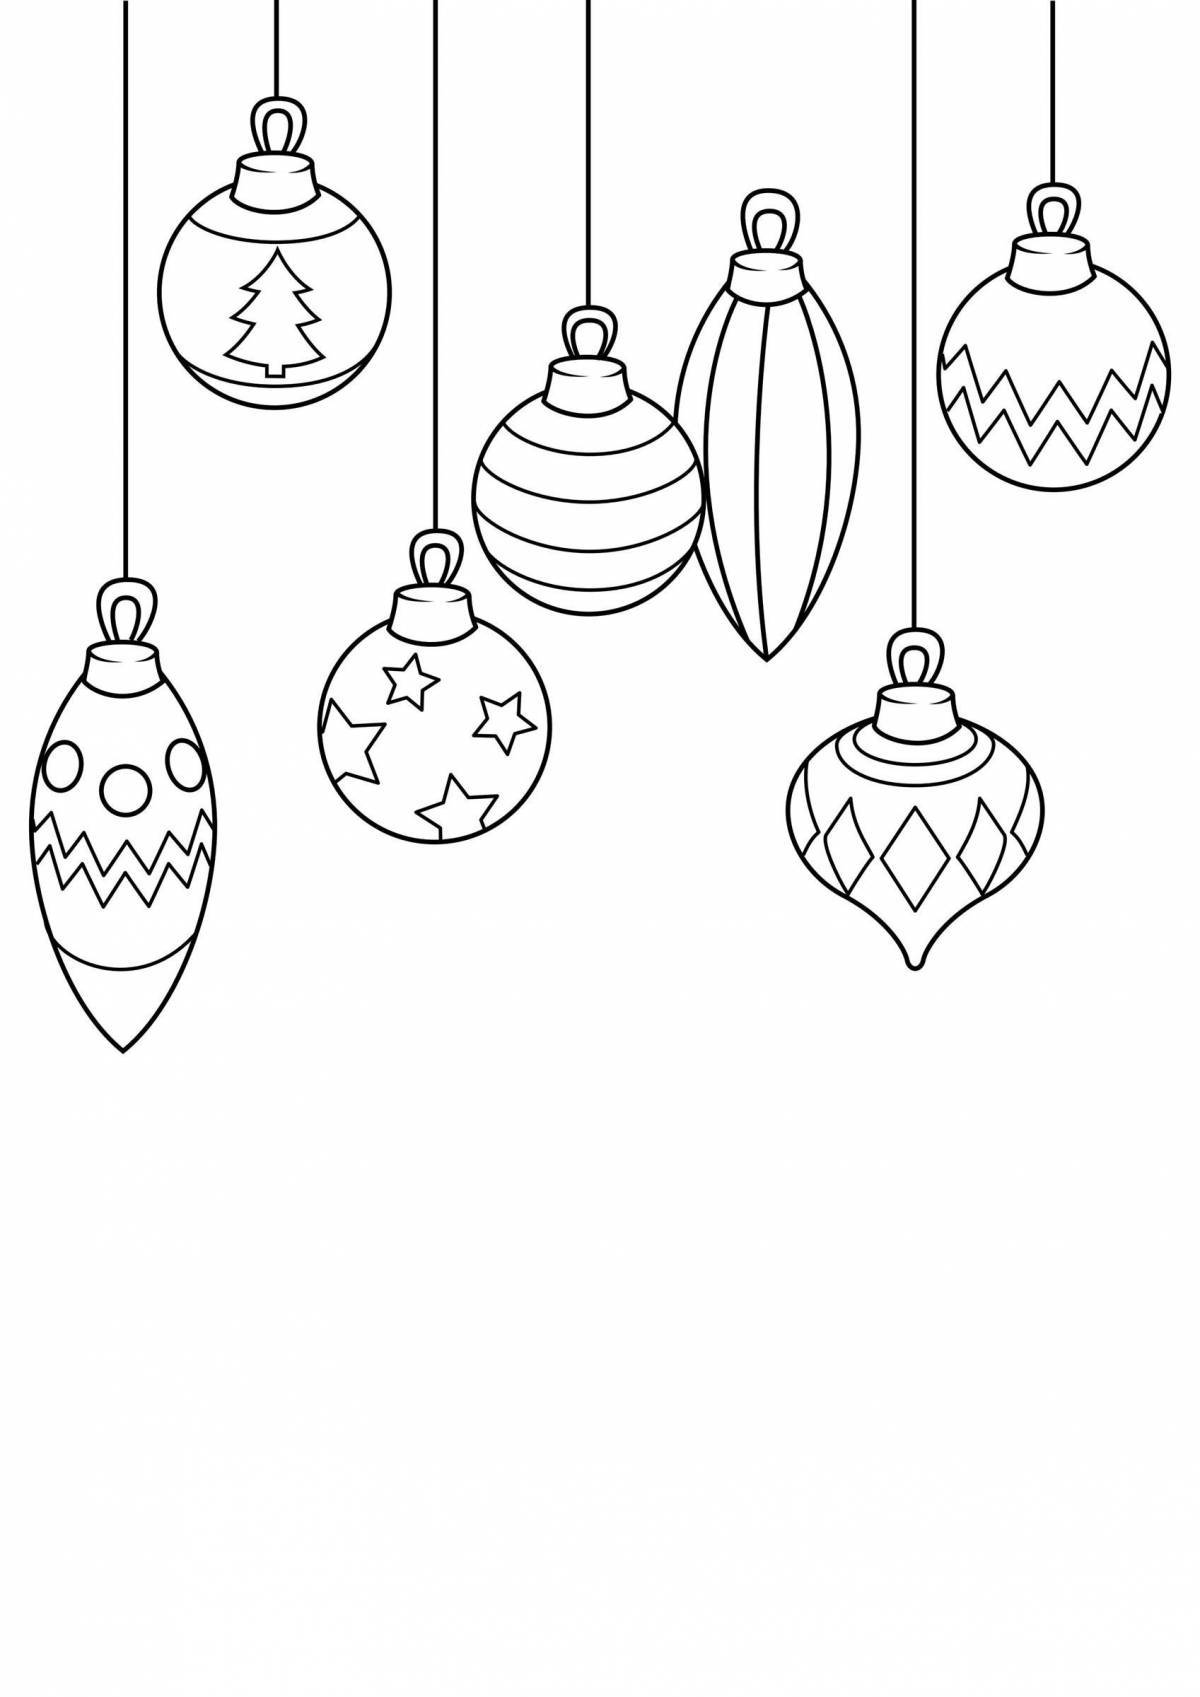 Christmas decoration in ecstasy coloring page